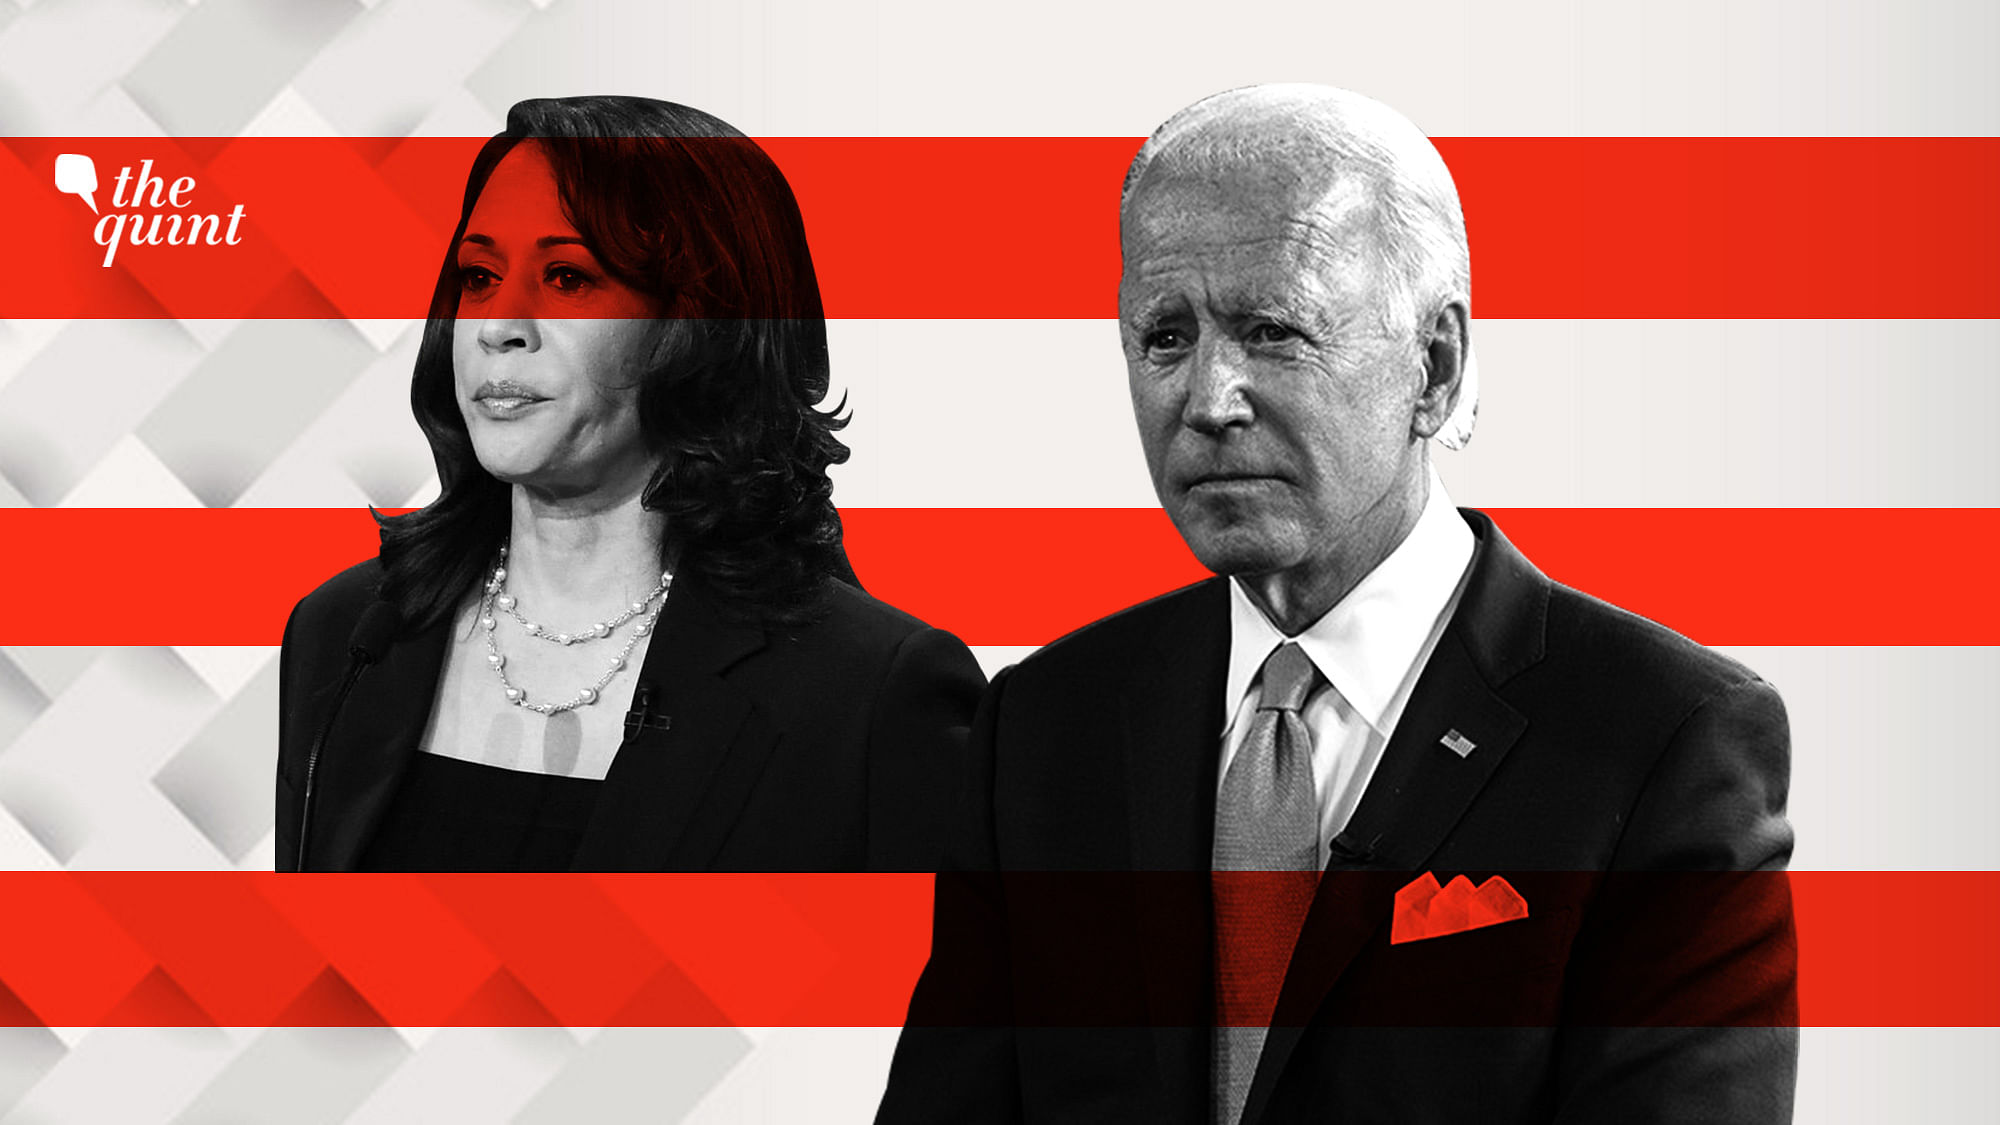 Joe Biden is about to go head-to-head with Republican incumbent Donald Trump this November.